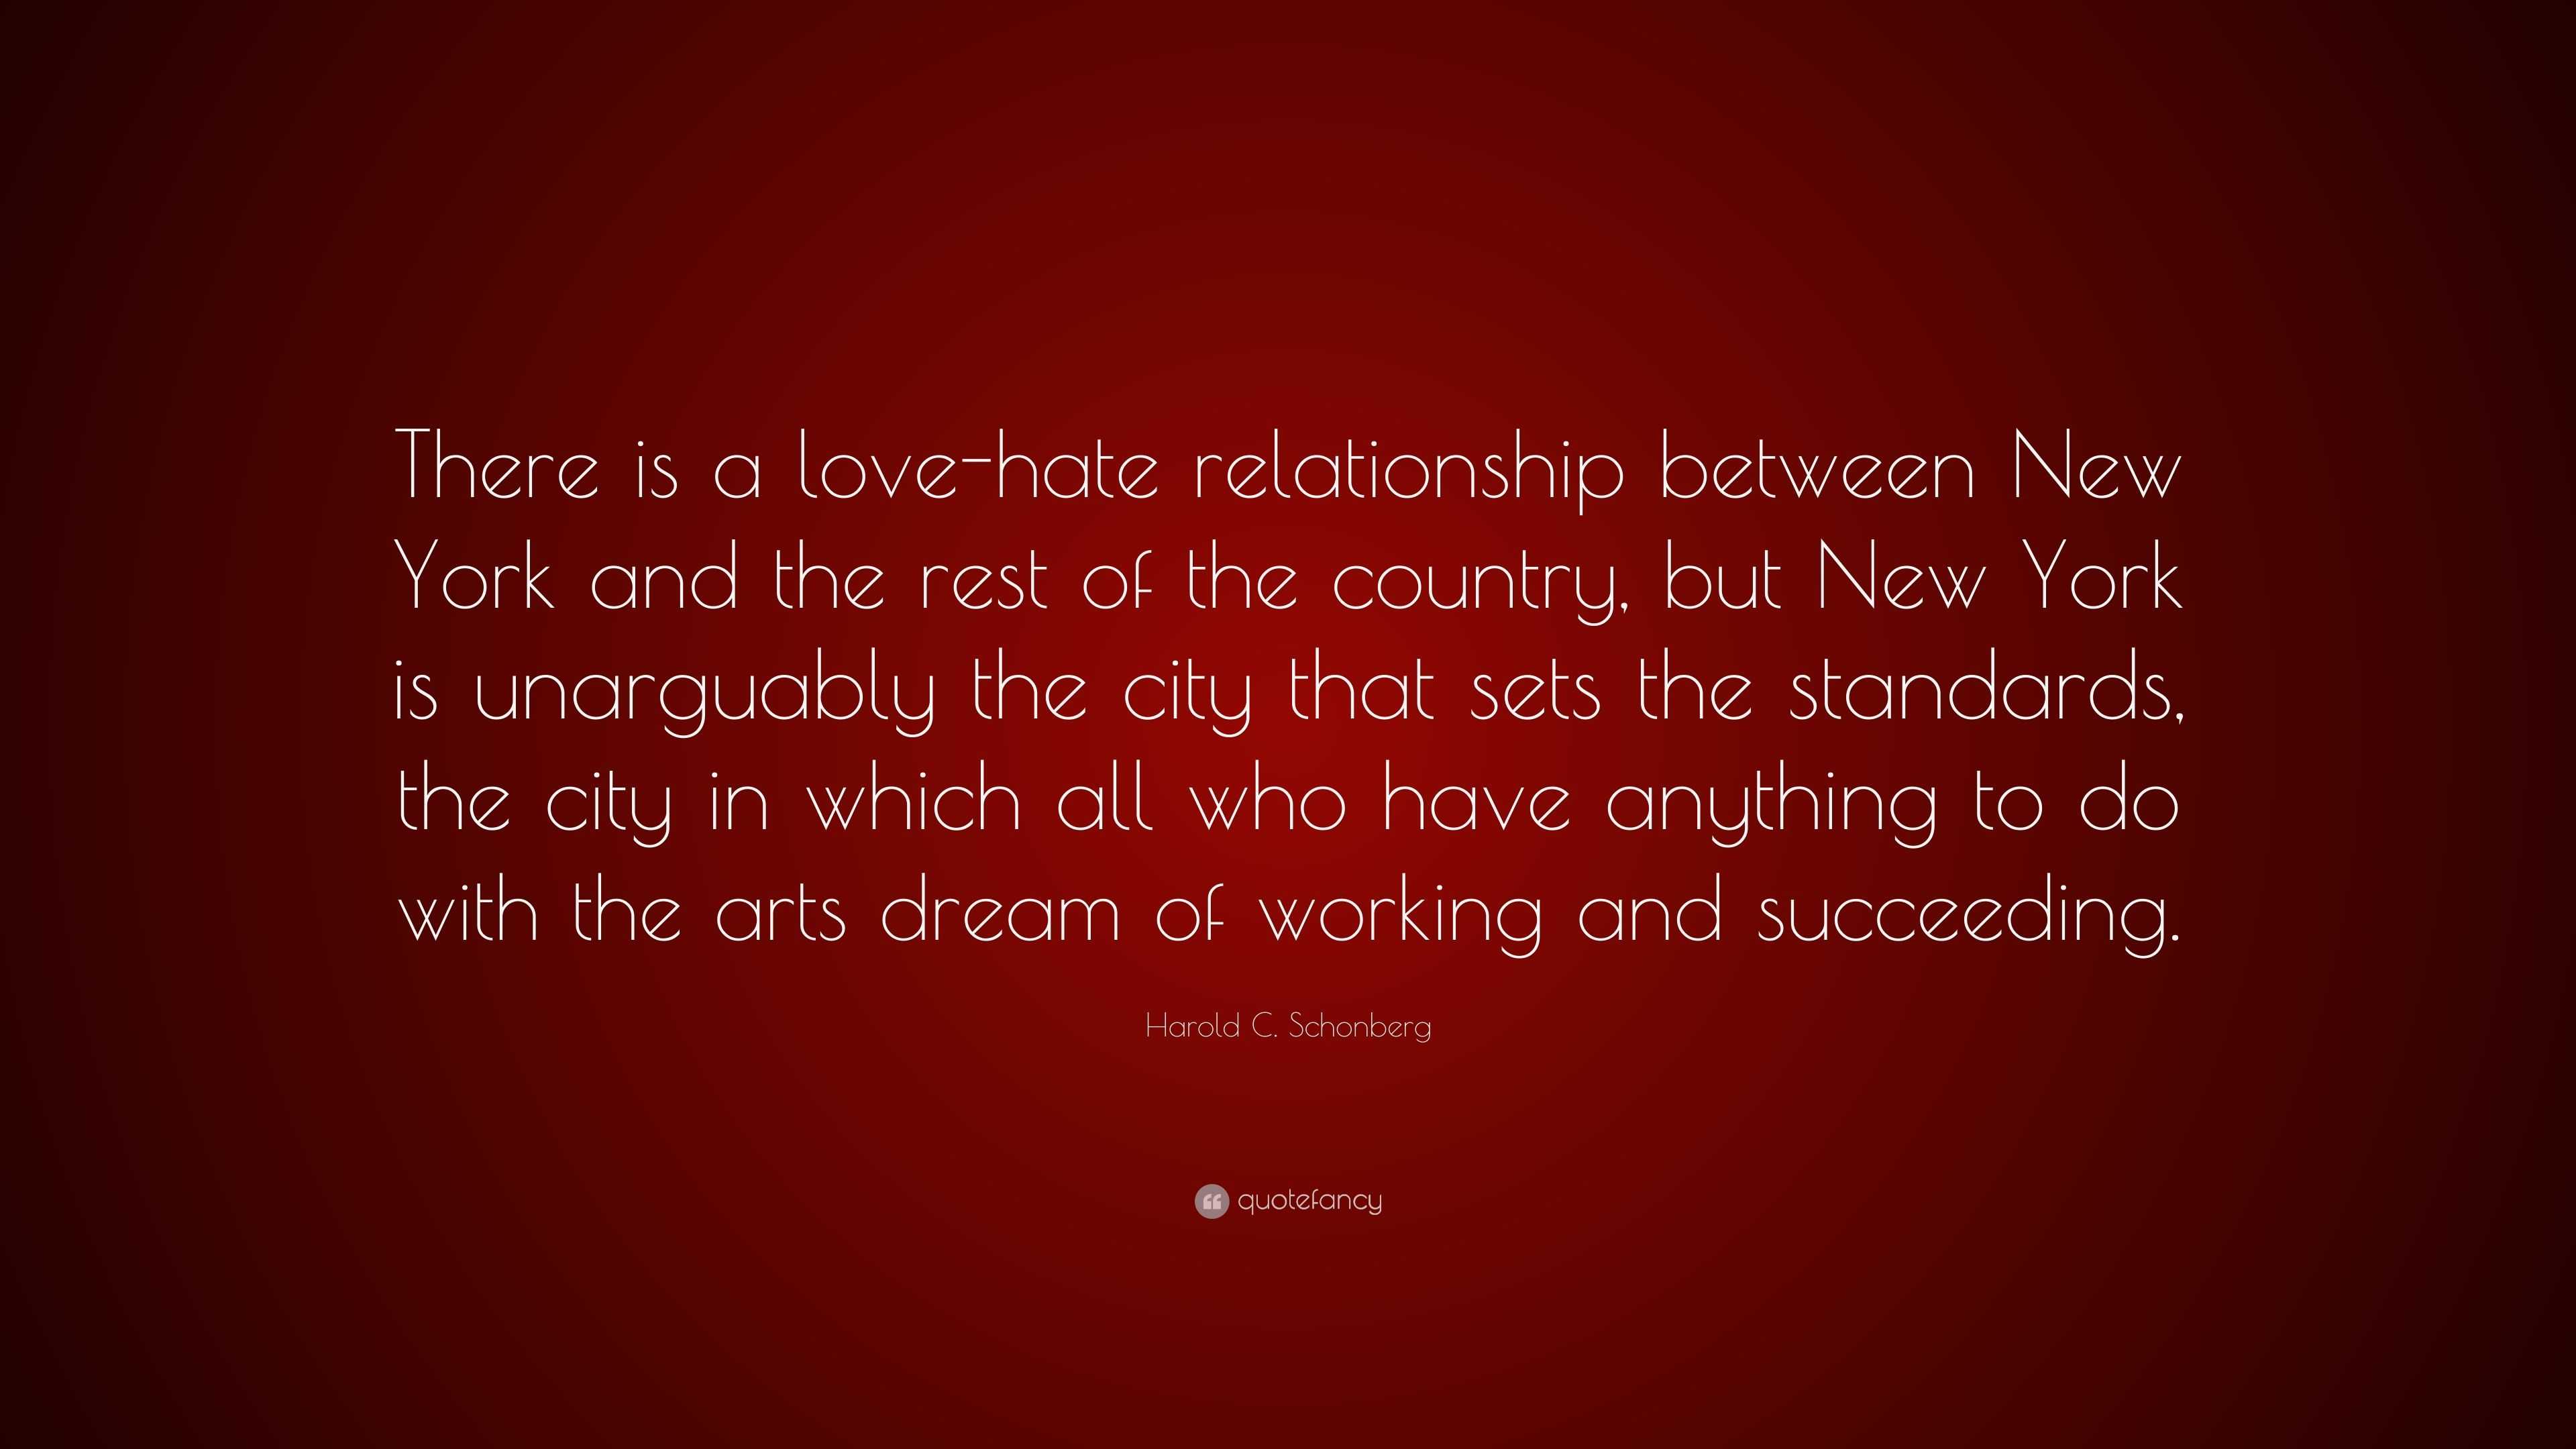 Harold C Schonberg Quote “There is a love hate relationship between New